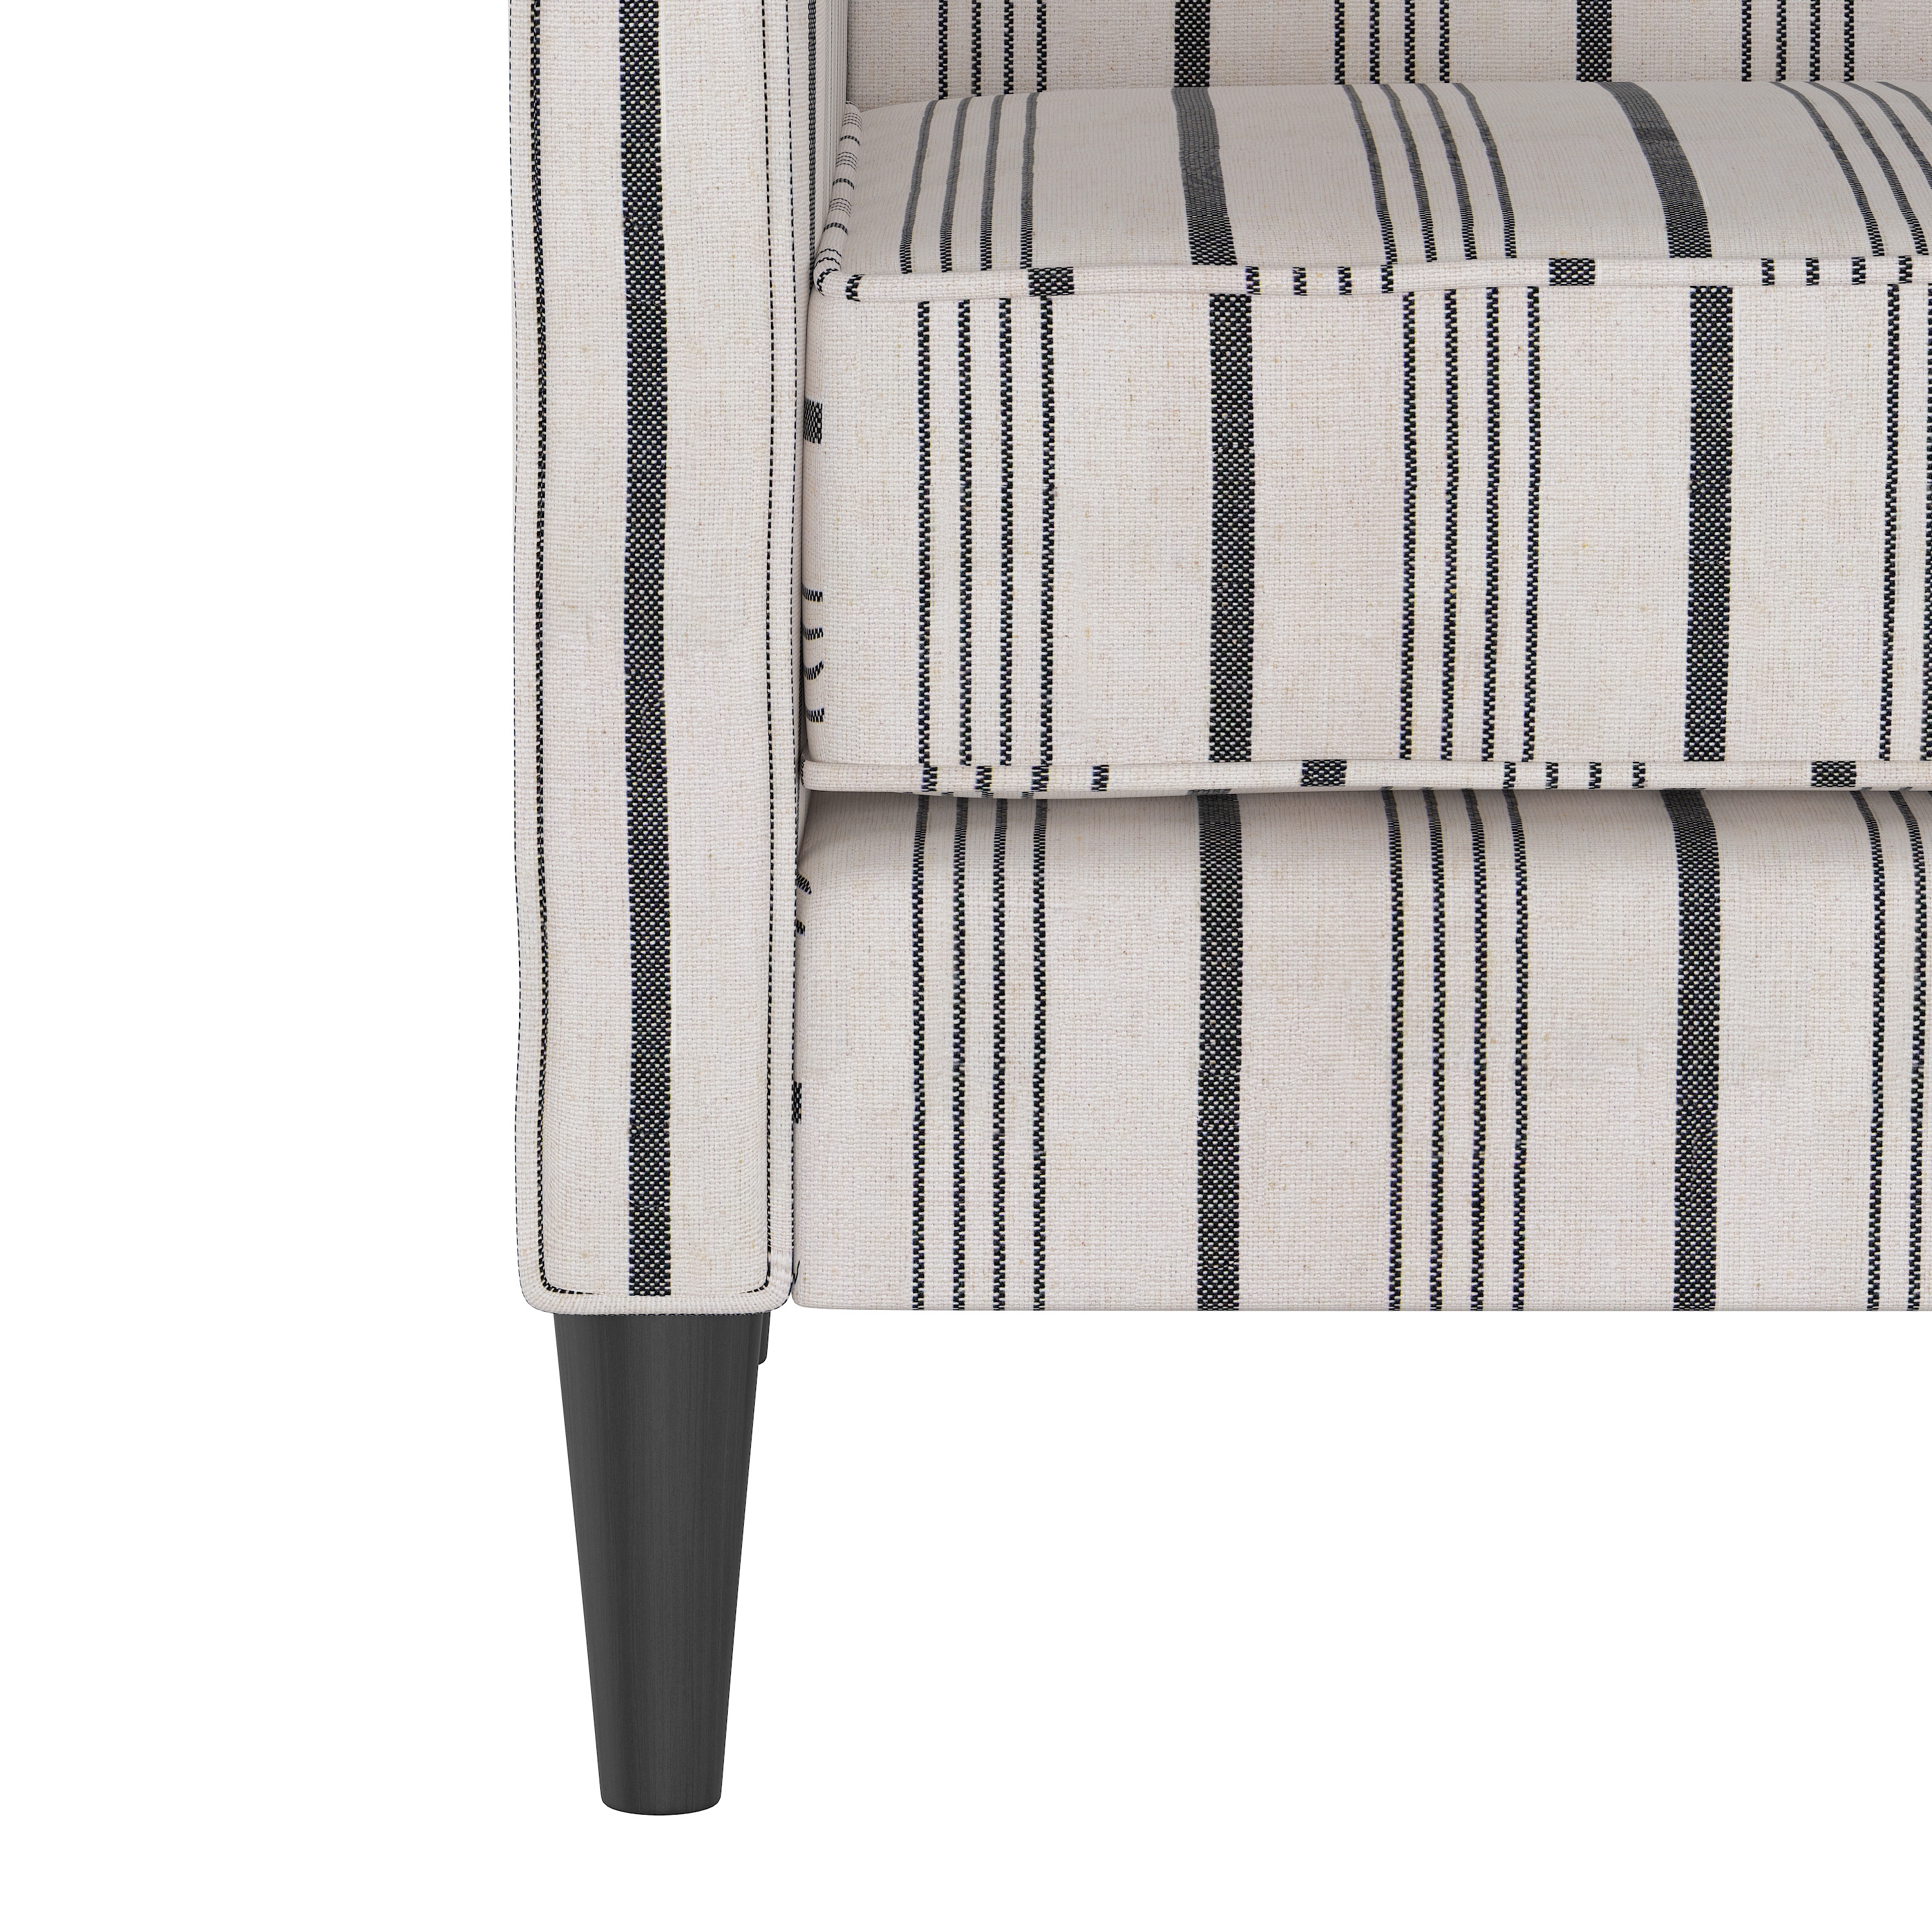 Downing Settee, Albion Stripe - DNU - Image 4